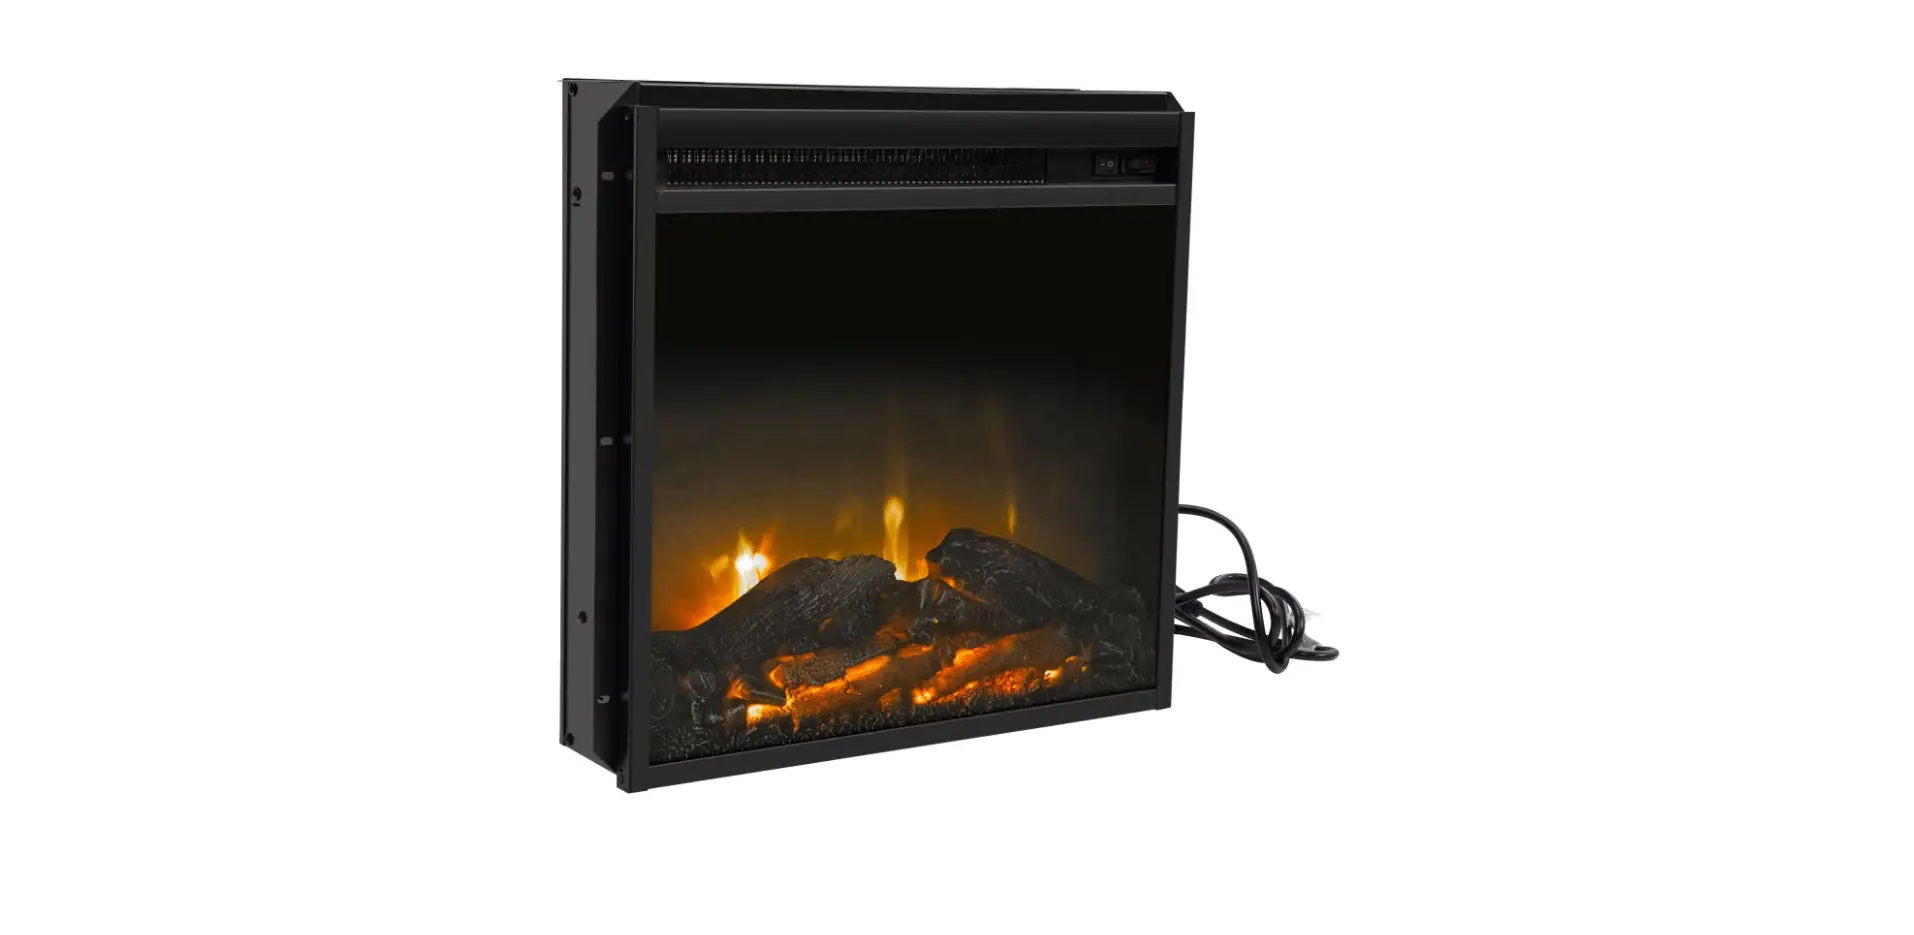 HG61B1158 18 Inch Freestanding and Recessed Electric Fireplace Insert Heater